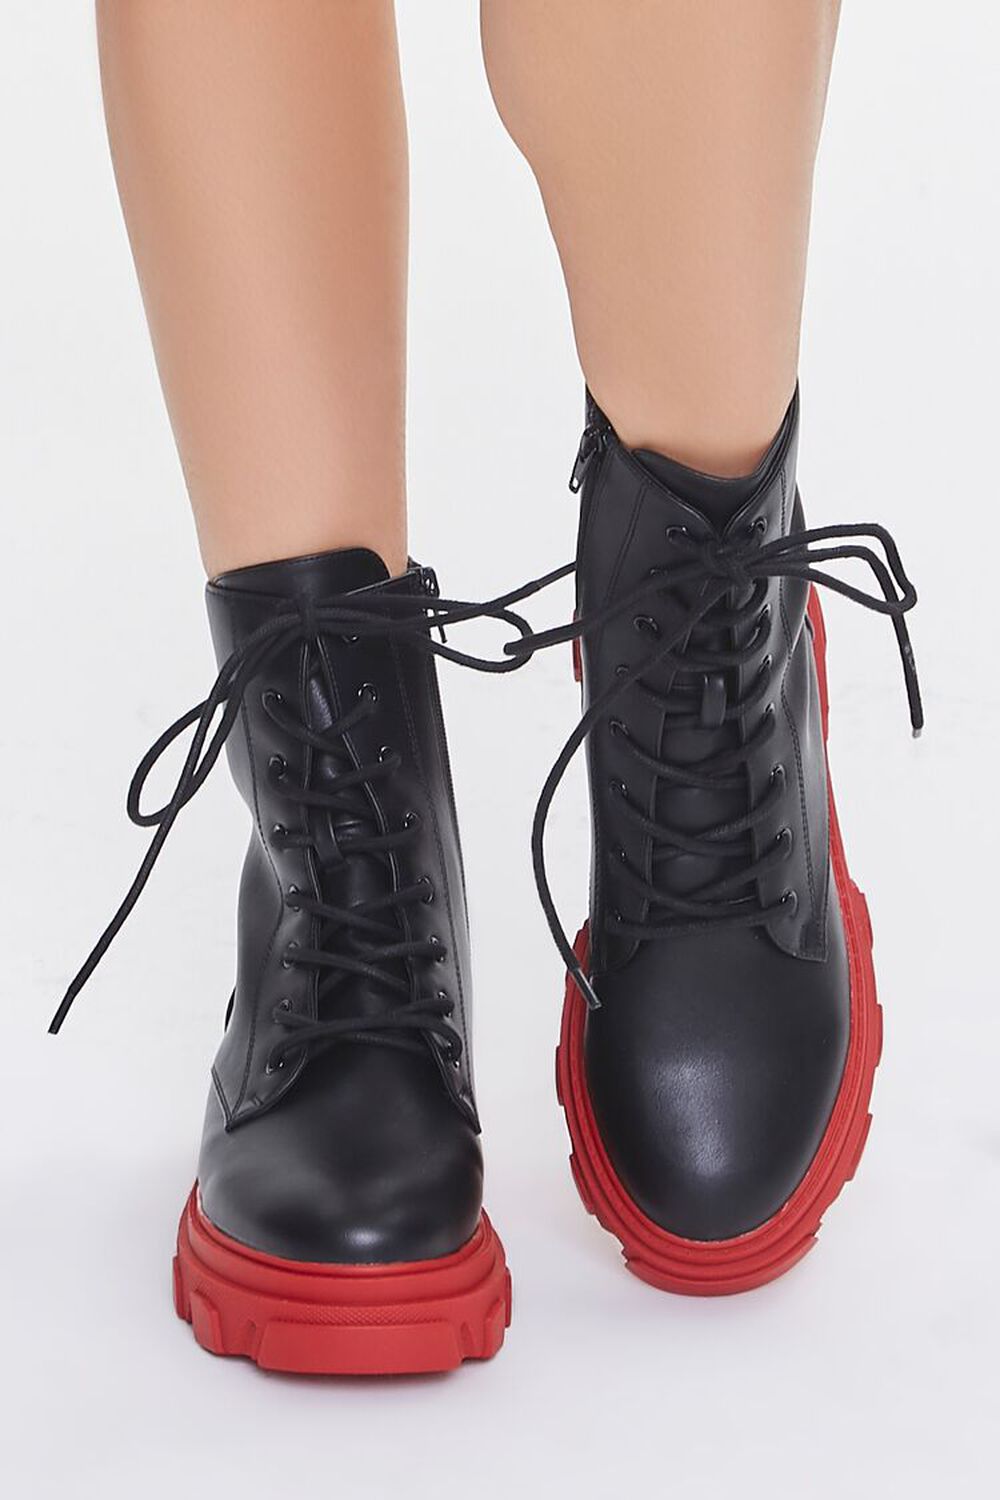 Colorblock Lace-Up Booties